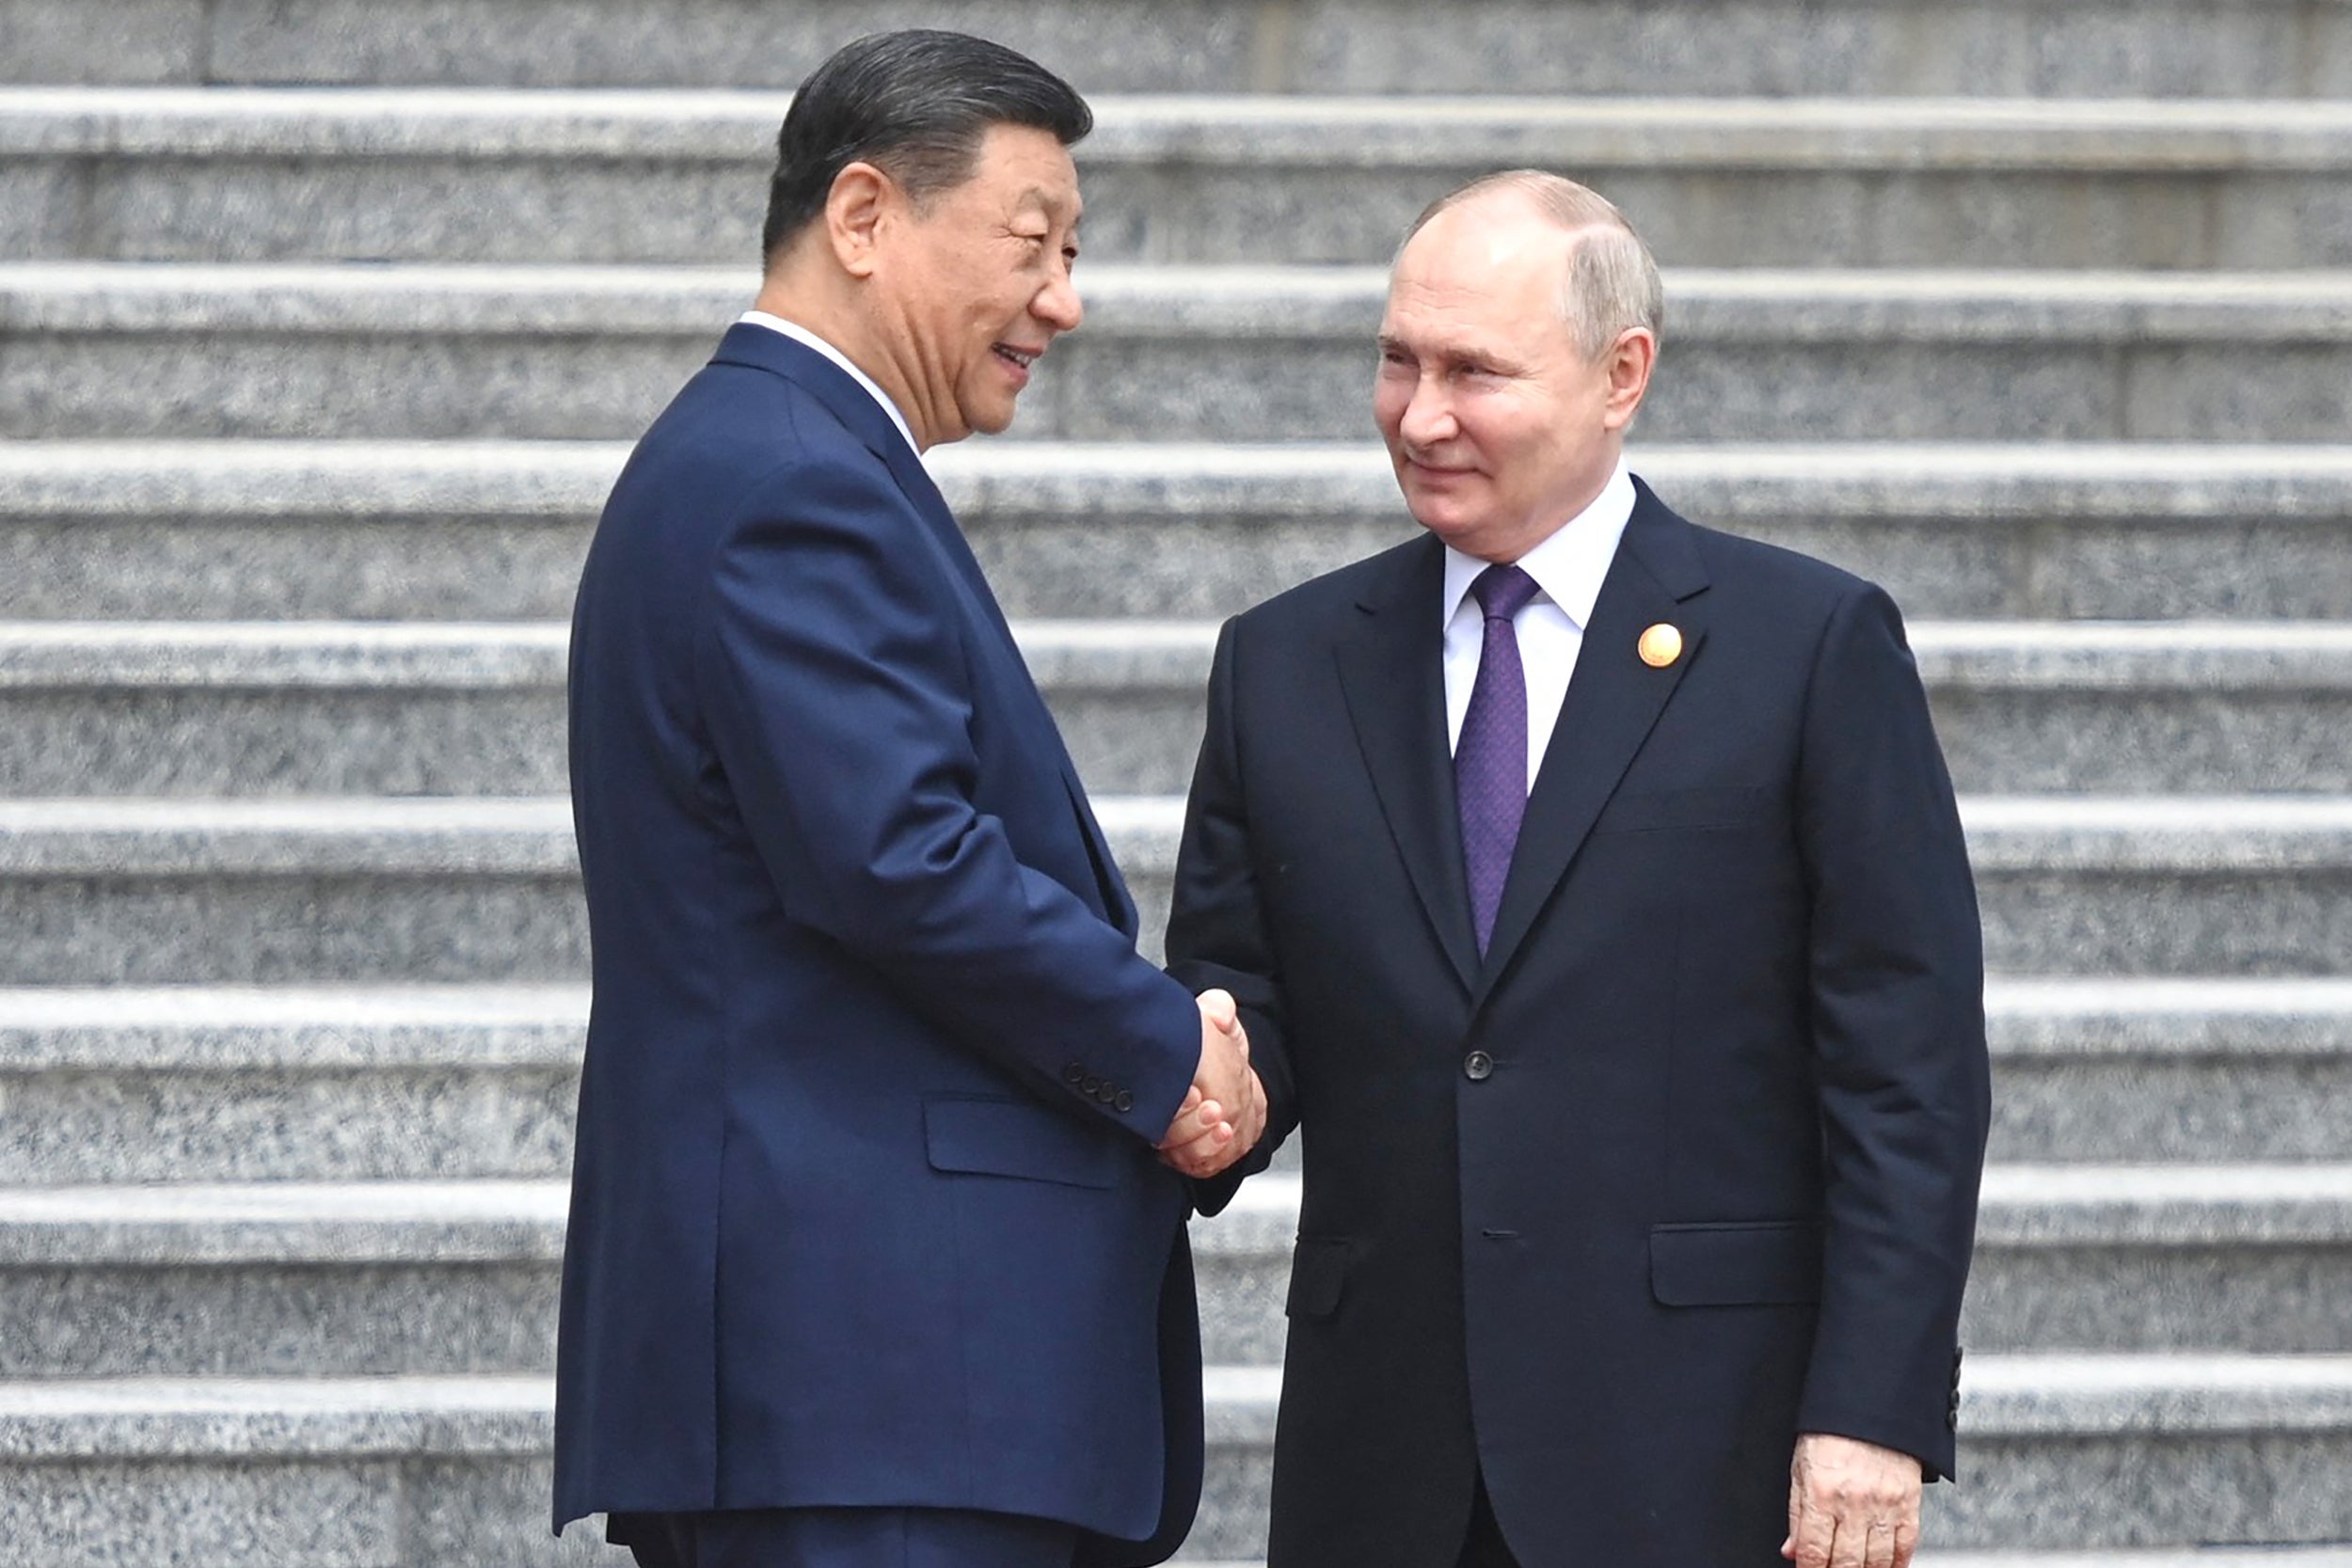 Vladimir Putin (R) and China's President Xi Jinping shake hands during an official welcoming ceremony in front of the Great Hall of the People in Tiananmen Square in Beijing